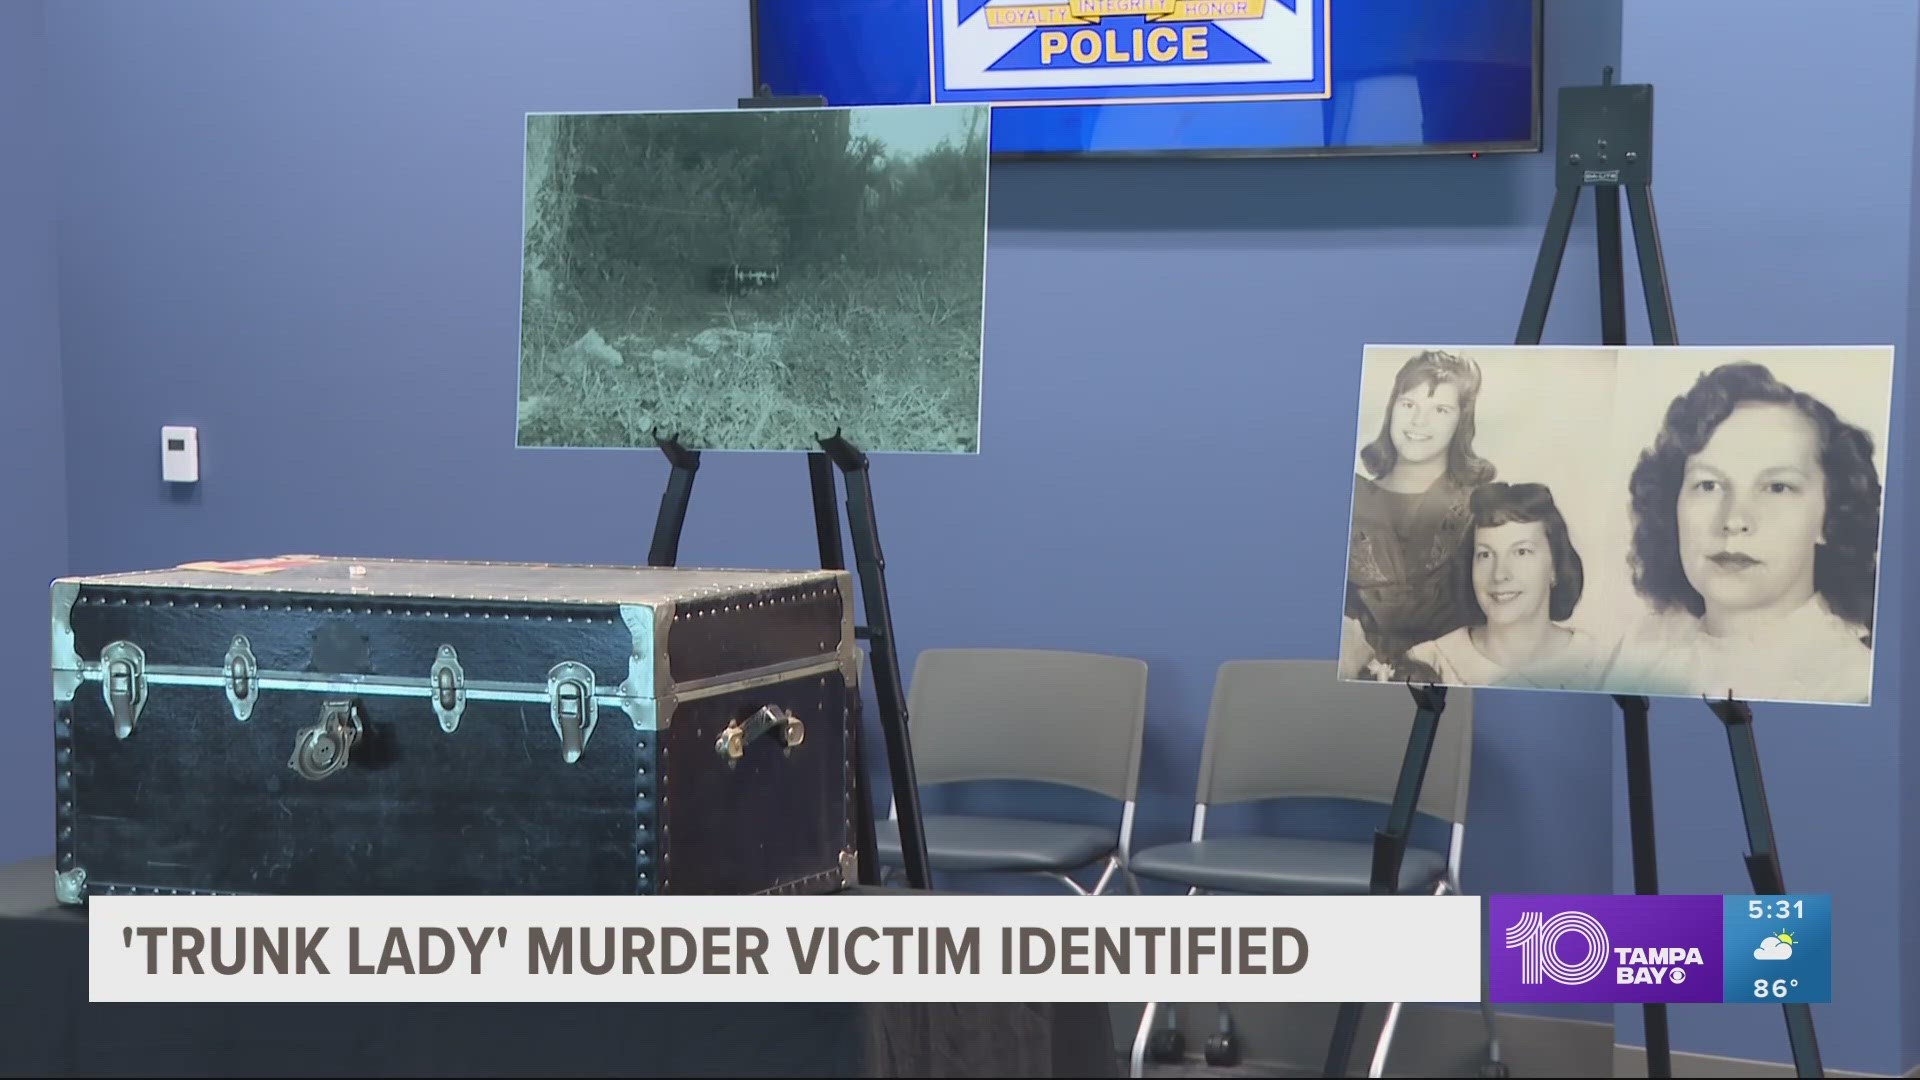 Detectives opened the trunk to find the remains of a woman in a plastic bag. Police said she had been strangled with a man's Western-style Bolo tie.